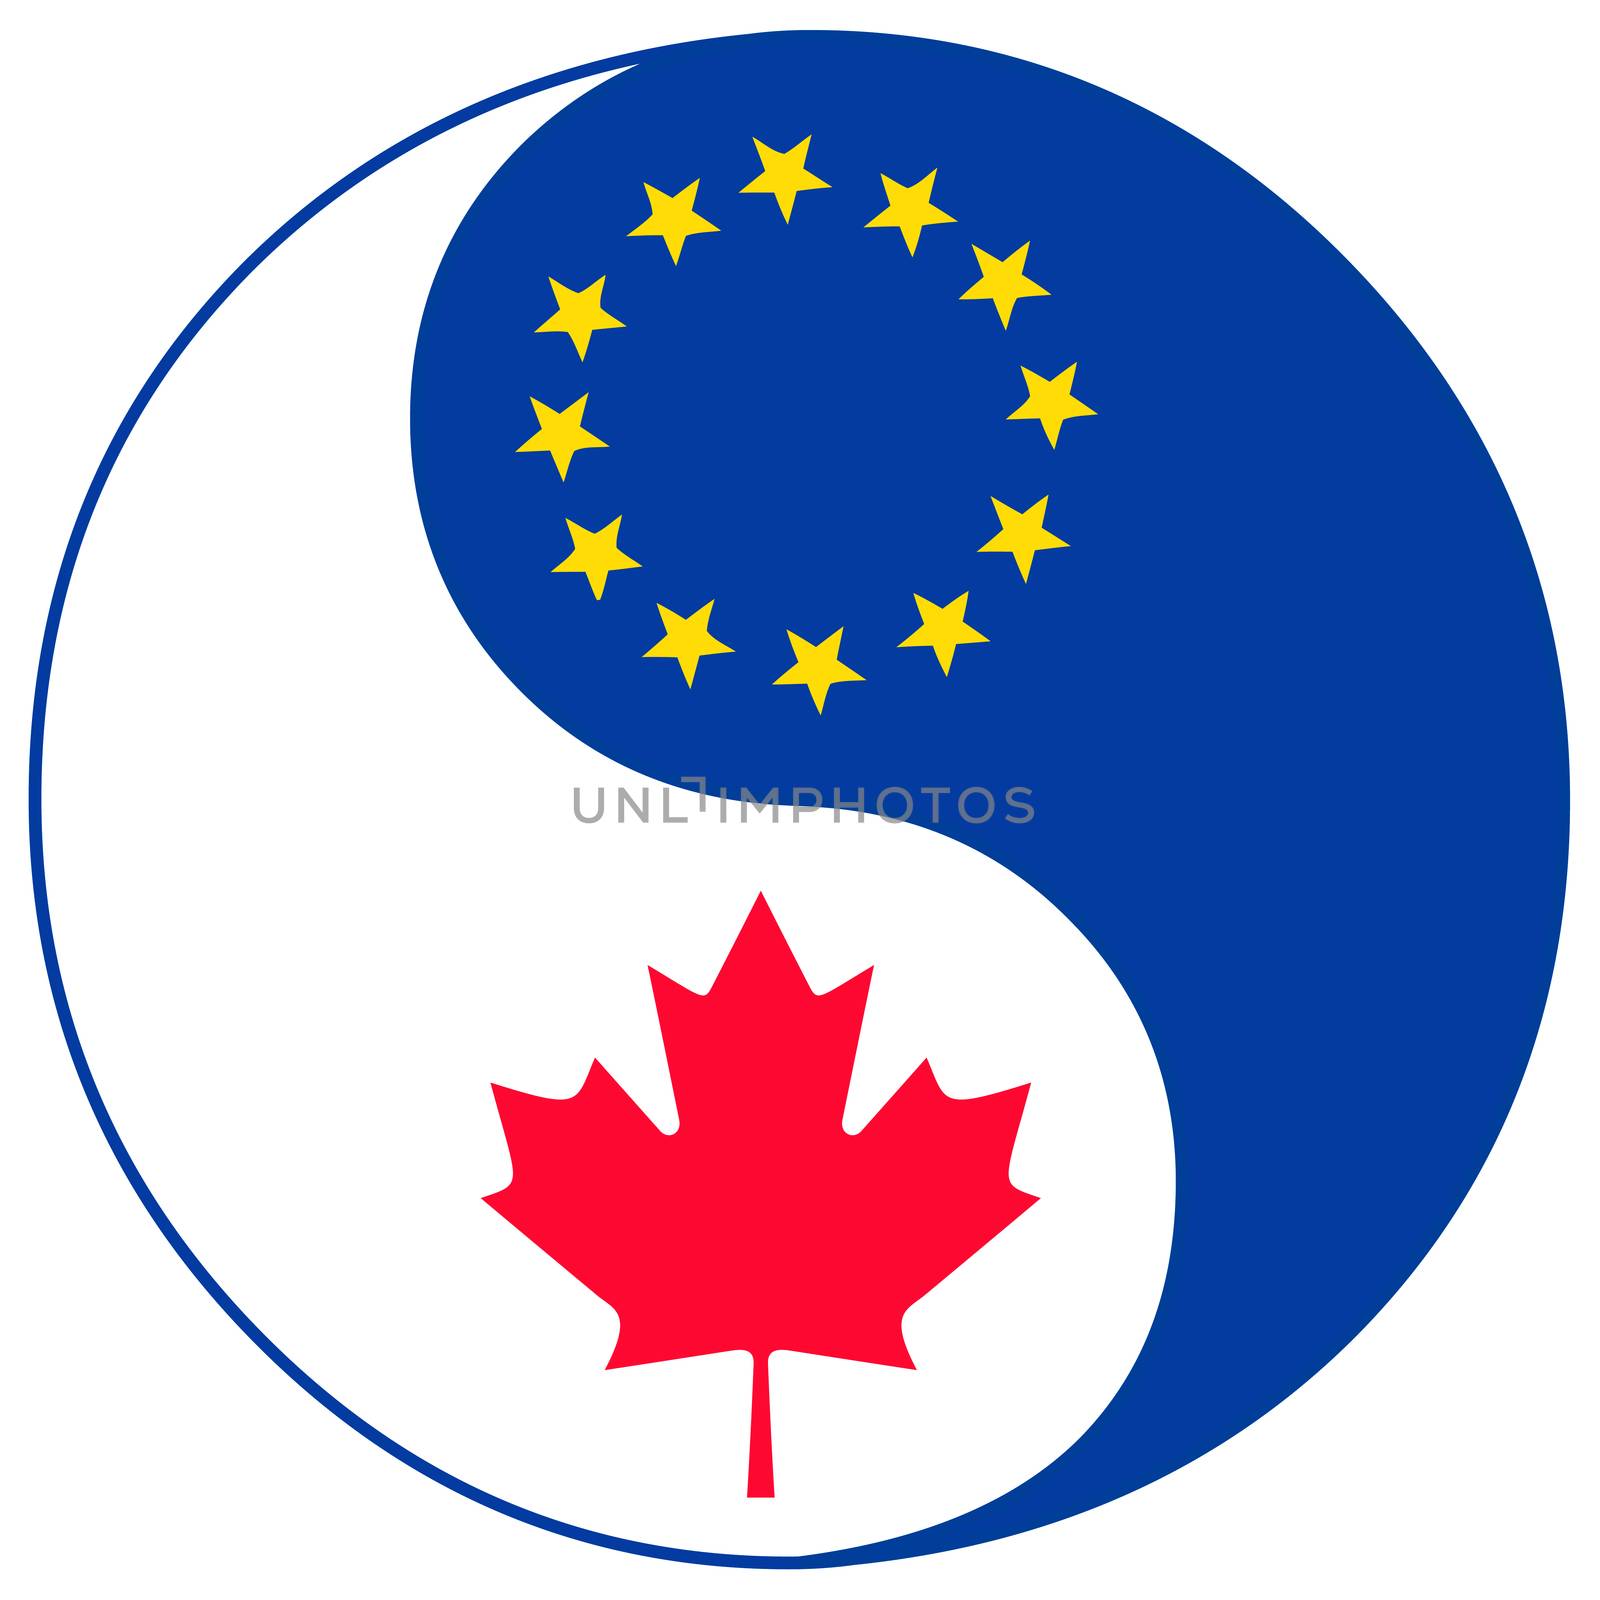 Concept sign for the Comprehensive Economic Agreement between Canada and the European Union